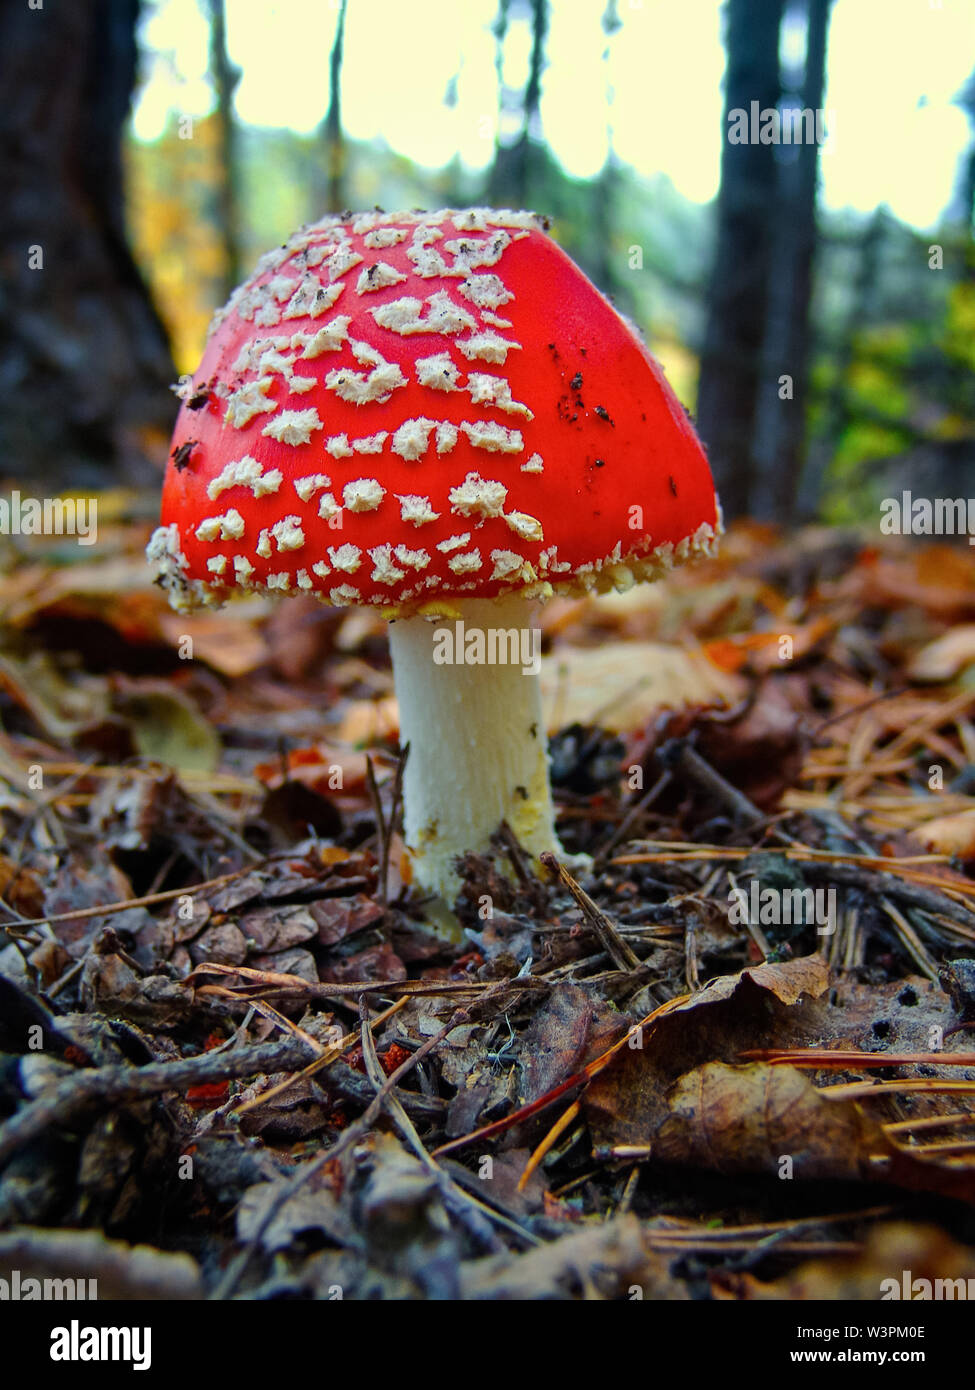 European red poisonous mushroom toadstool growing in the forest during the autumn season. Stock Photo